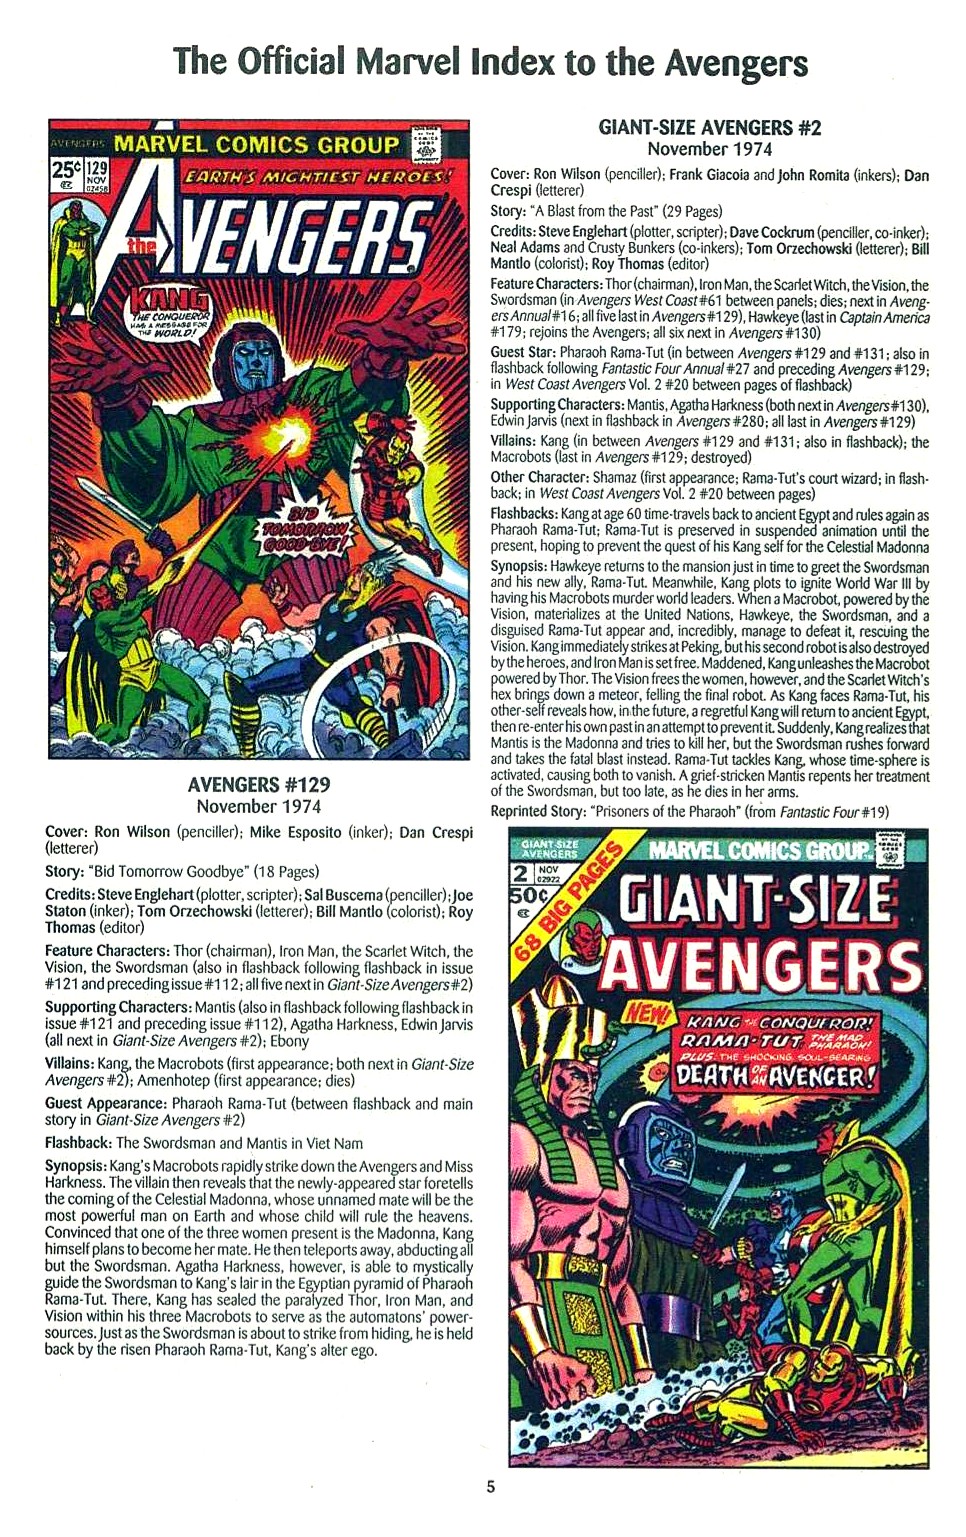 Read online The Official Marvel Index to the Avengers comic -  Issue #3 - 7